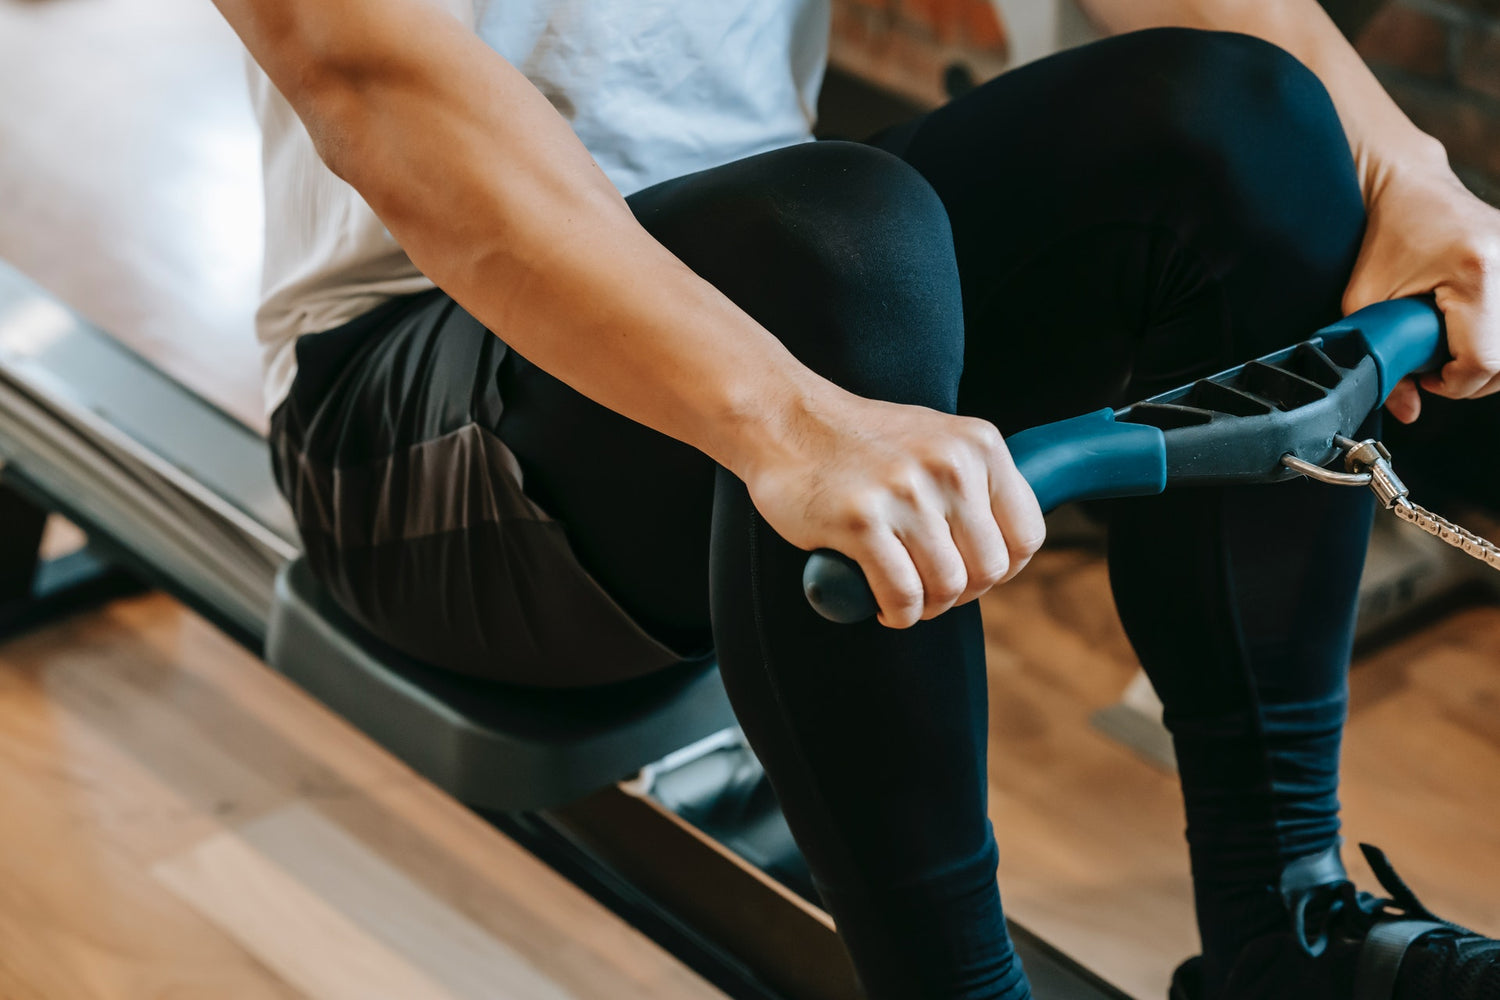 Rowing Machine vs. Exercise Bike: Which One Is Better?